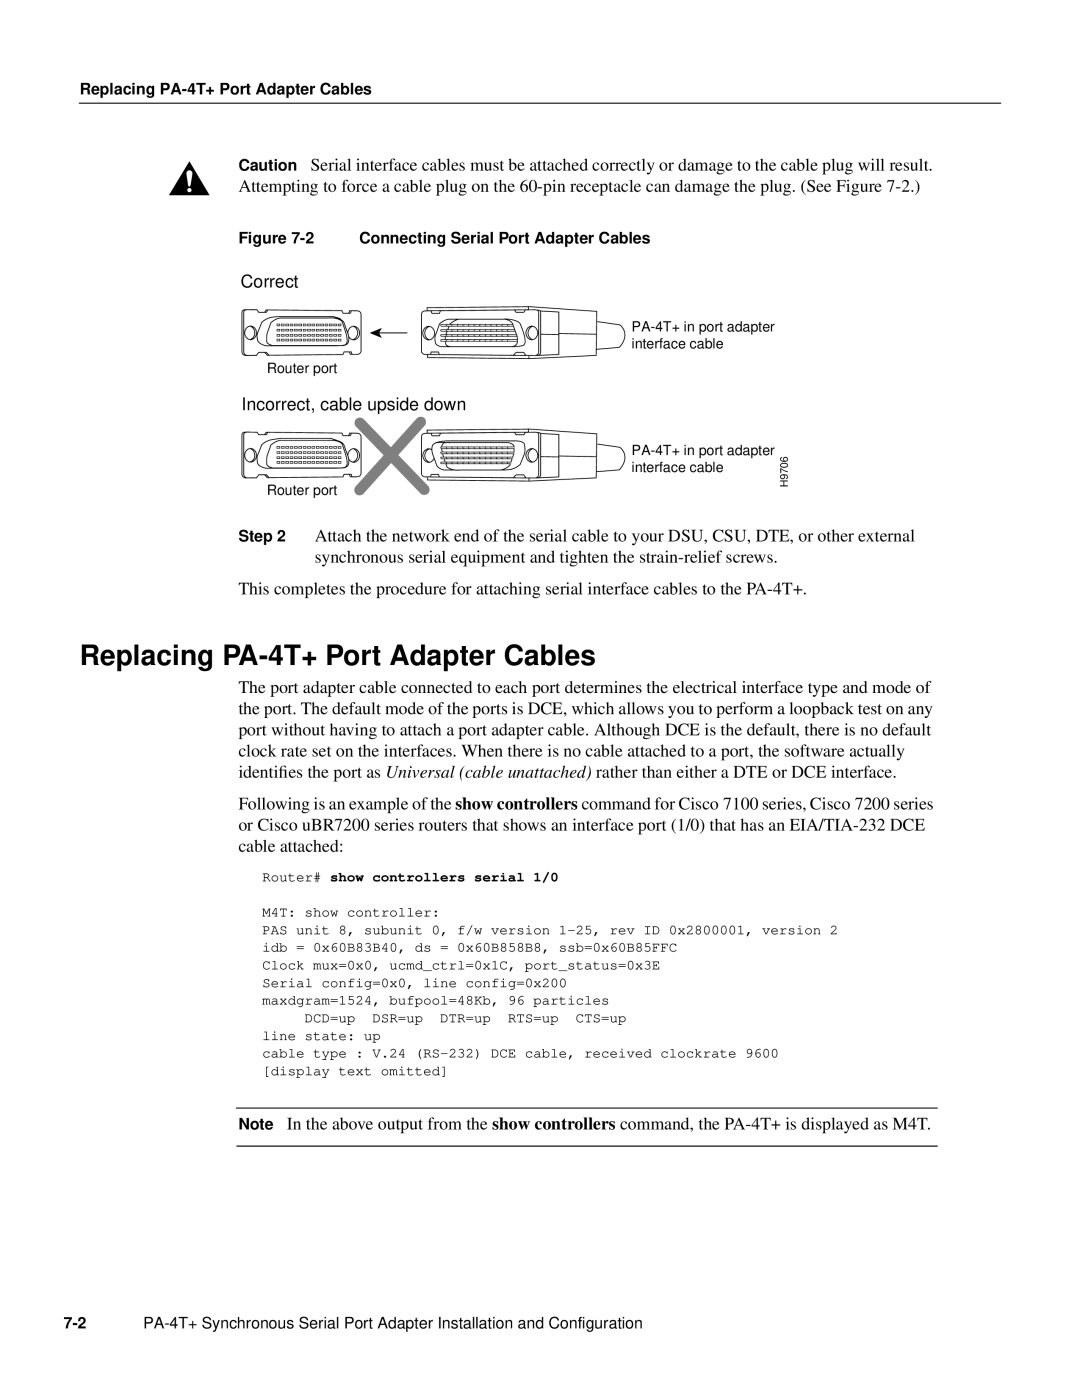 Cisco Systems manual Replacing PA-4T+ Port Adapter Cables, Correct, Incorrect, cable upside down 